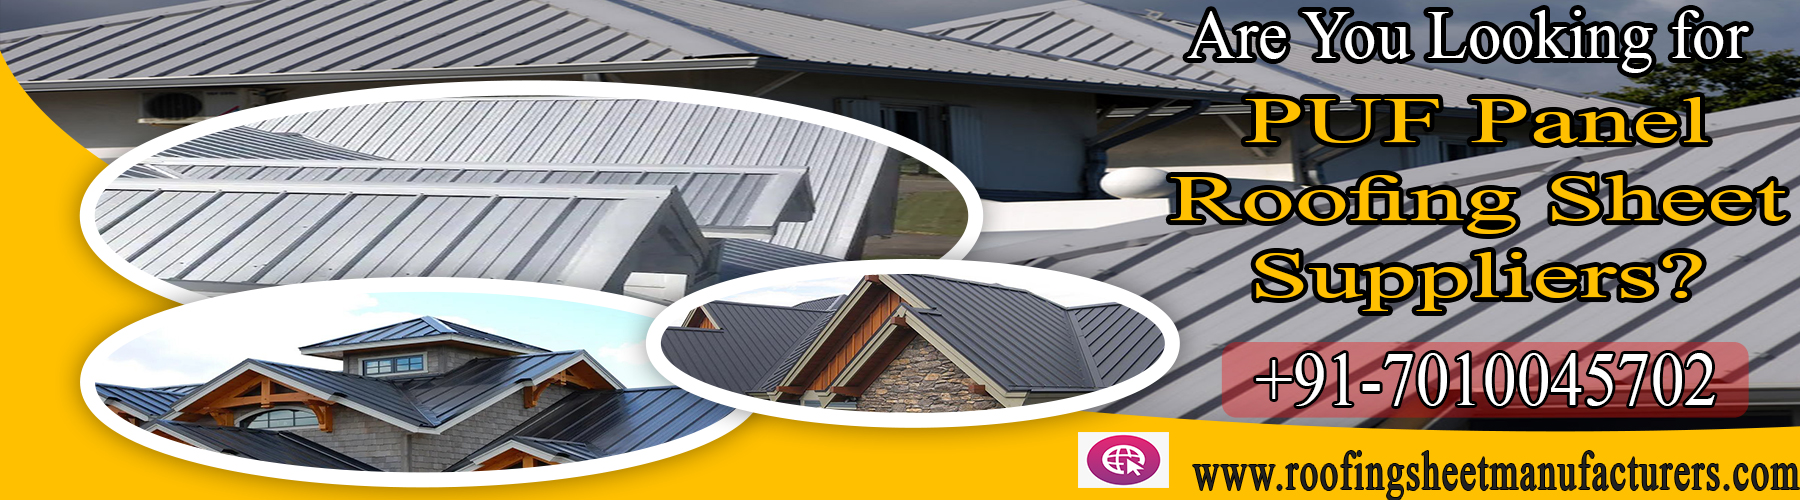 PUF Panel Roofing Sheet Suppliers